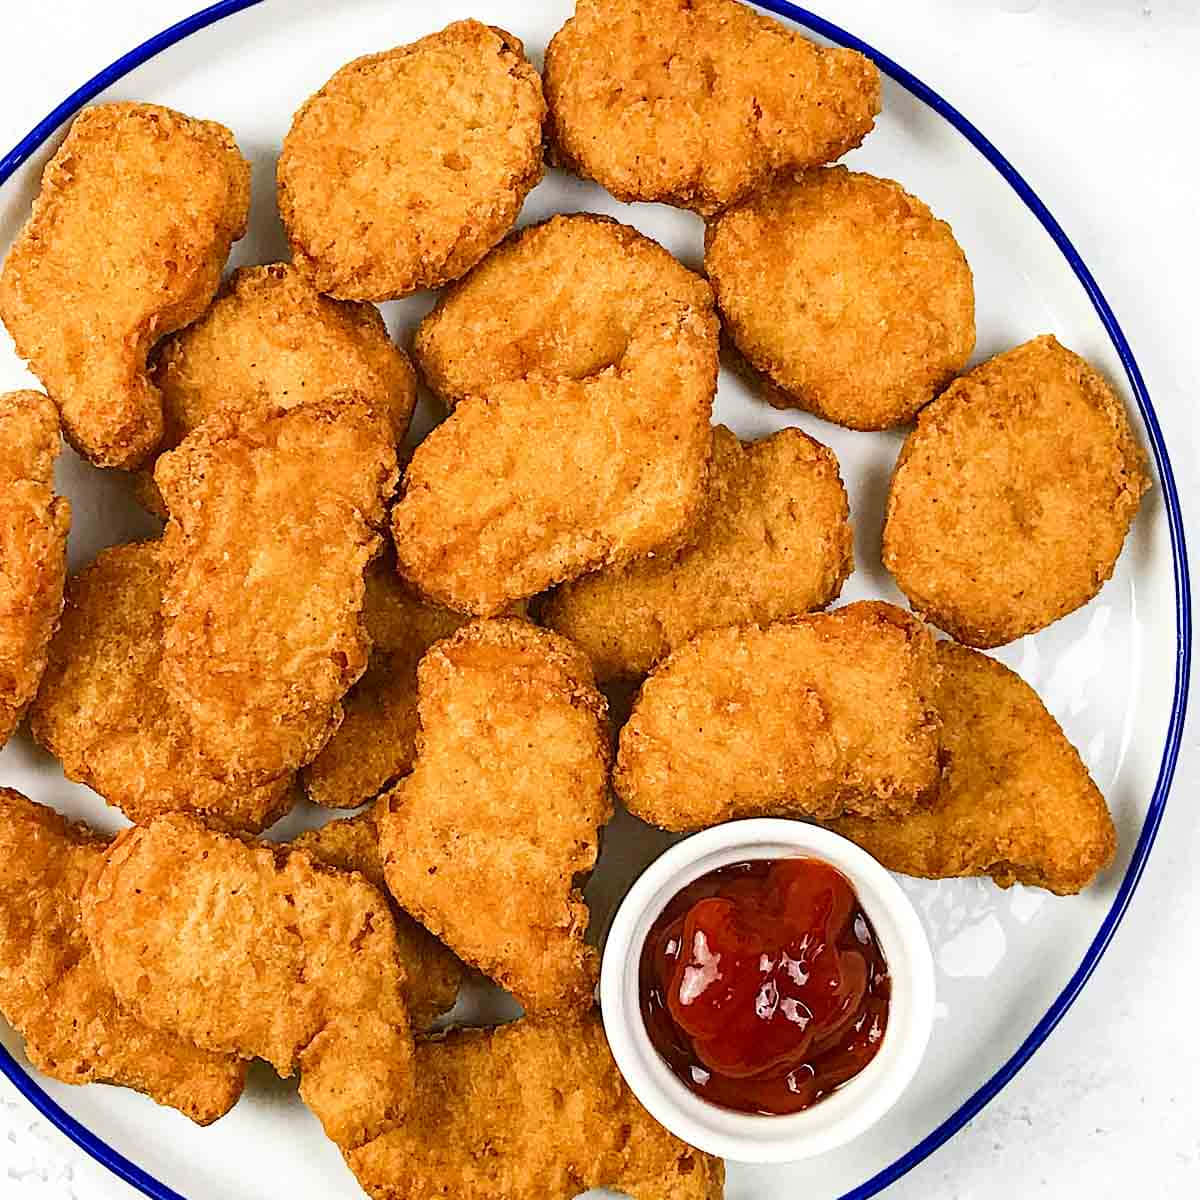 These delicious chicken nuggets are sure to please! Wallpaper